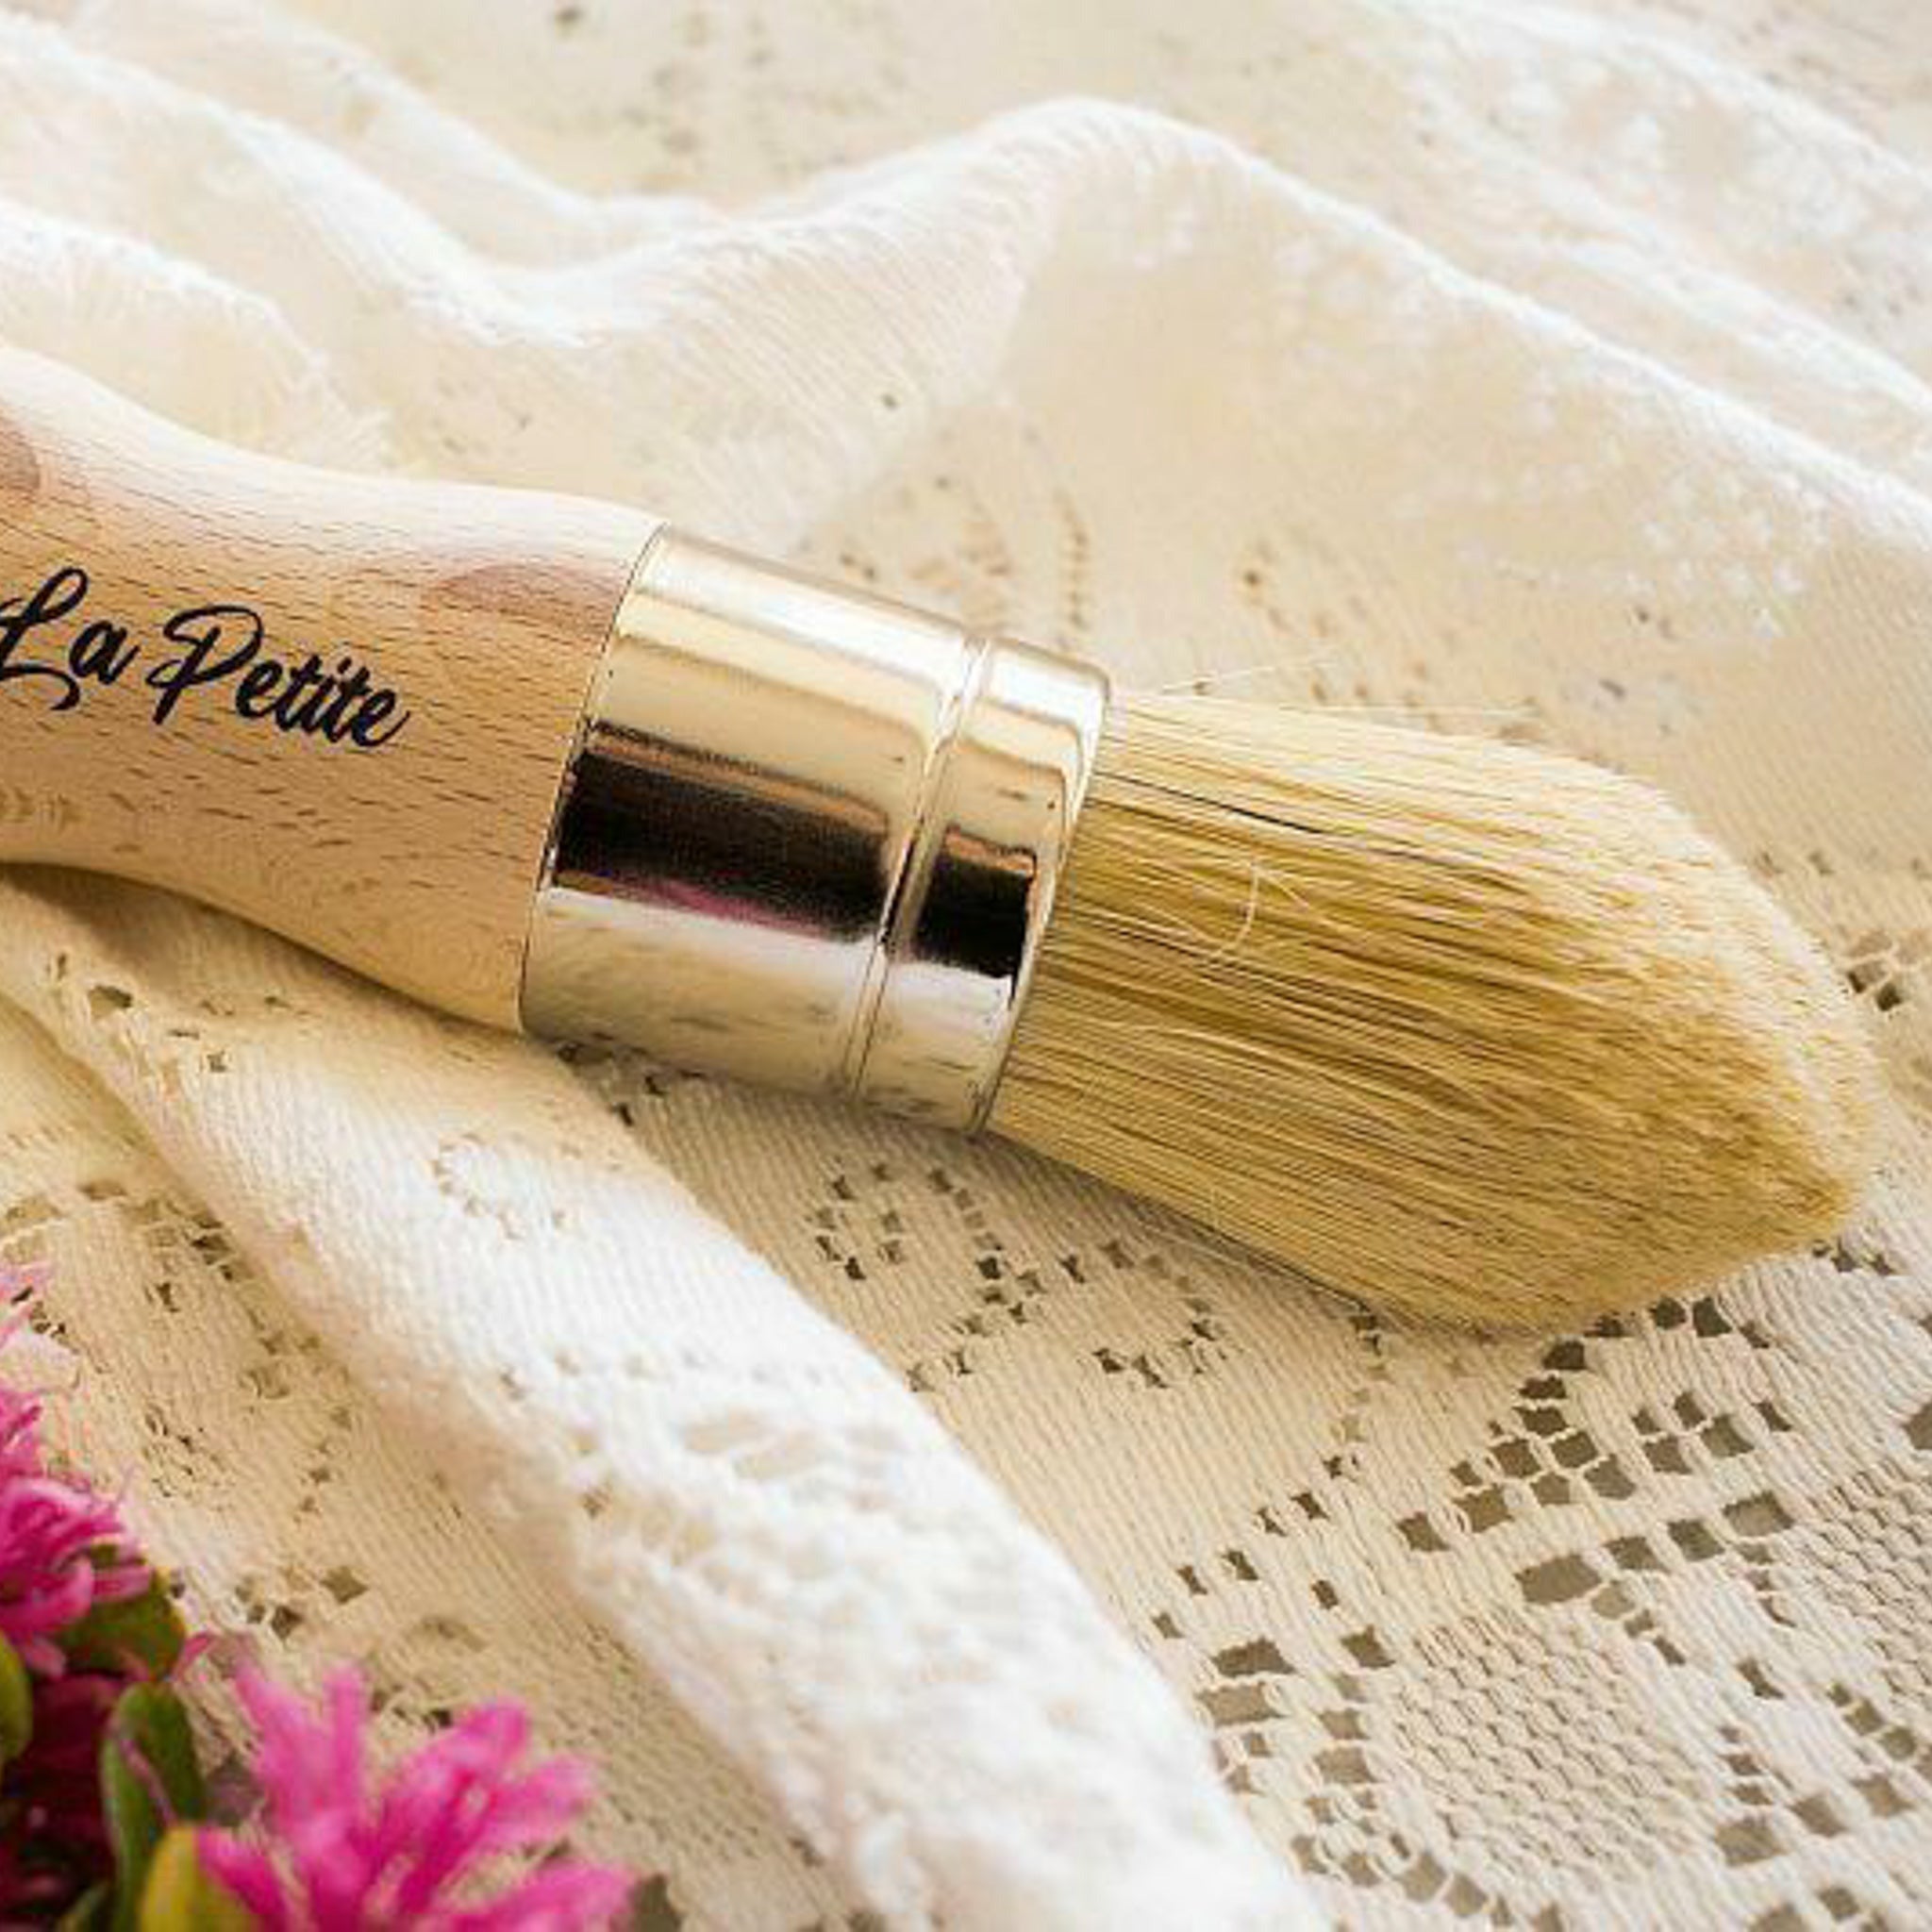 Dixie Belle's La Petite Paint Brush is against a lace background. This brush has natural bristles and is shaped to help reach the fine-detailed areas on your furniture projects.